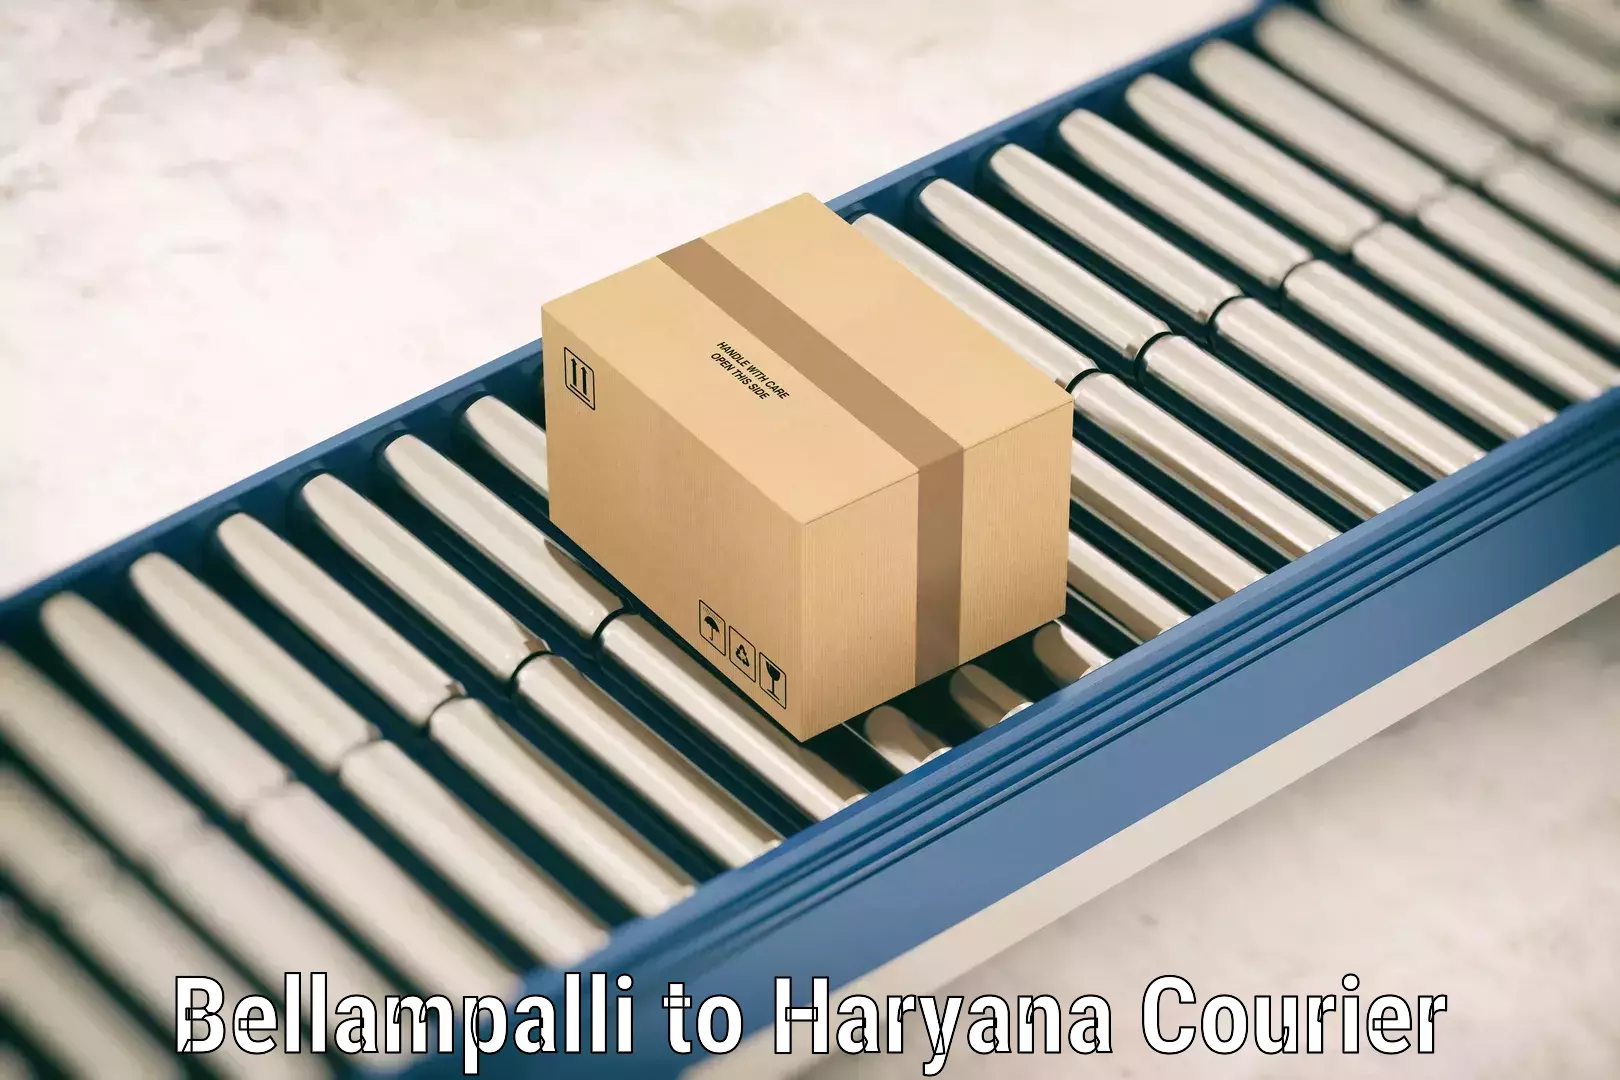 Electronic items luggage shipping in Bellampalli to Chaudhary Charan Singh Haryana Agricultural University Hisar